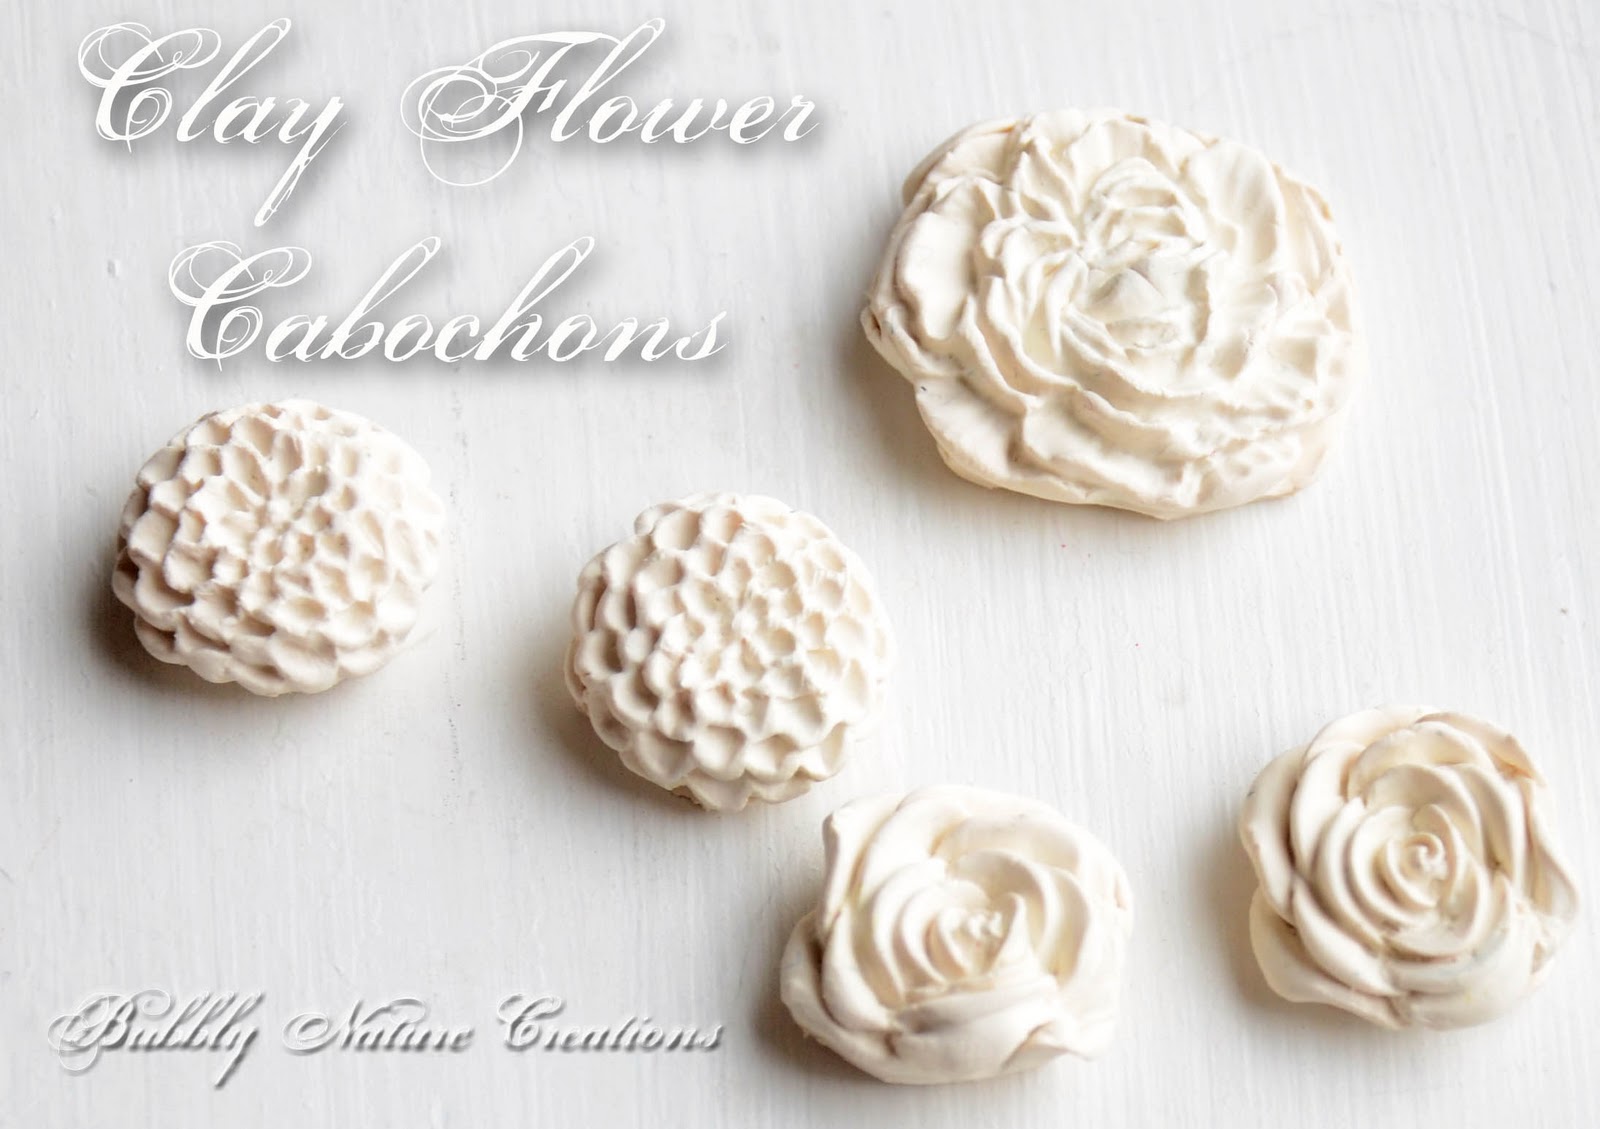 How to Make Clay Flower Cabochons ⋆ Sprinkle Some Fun